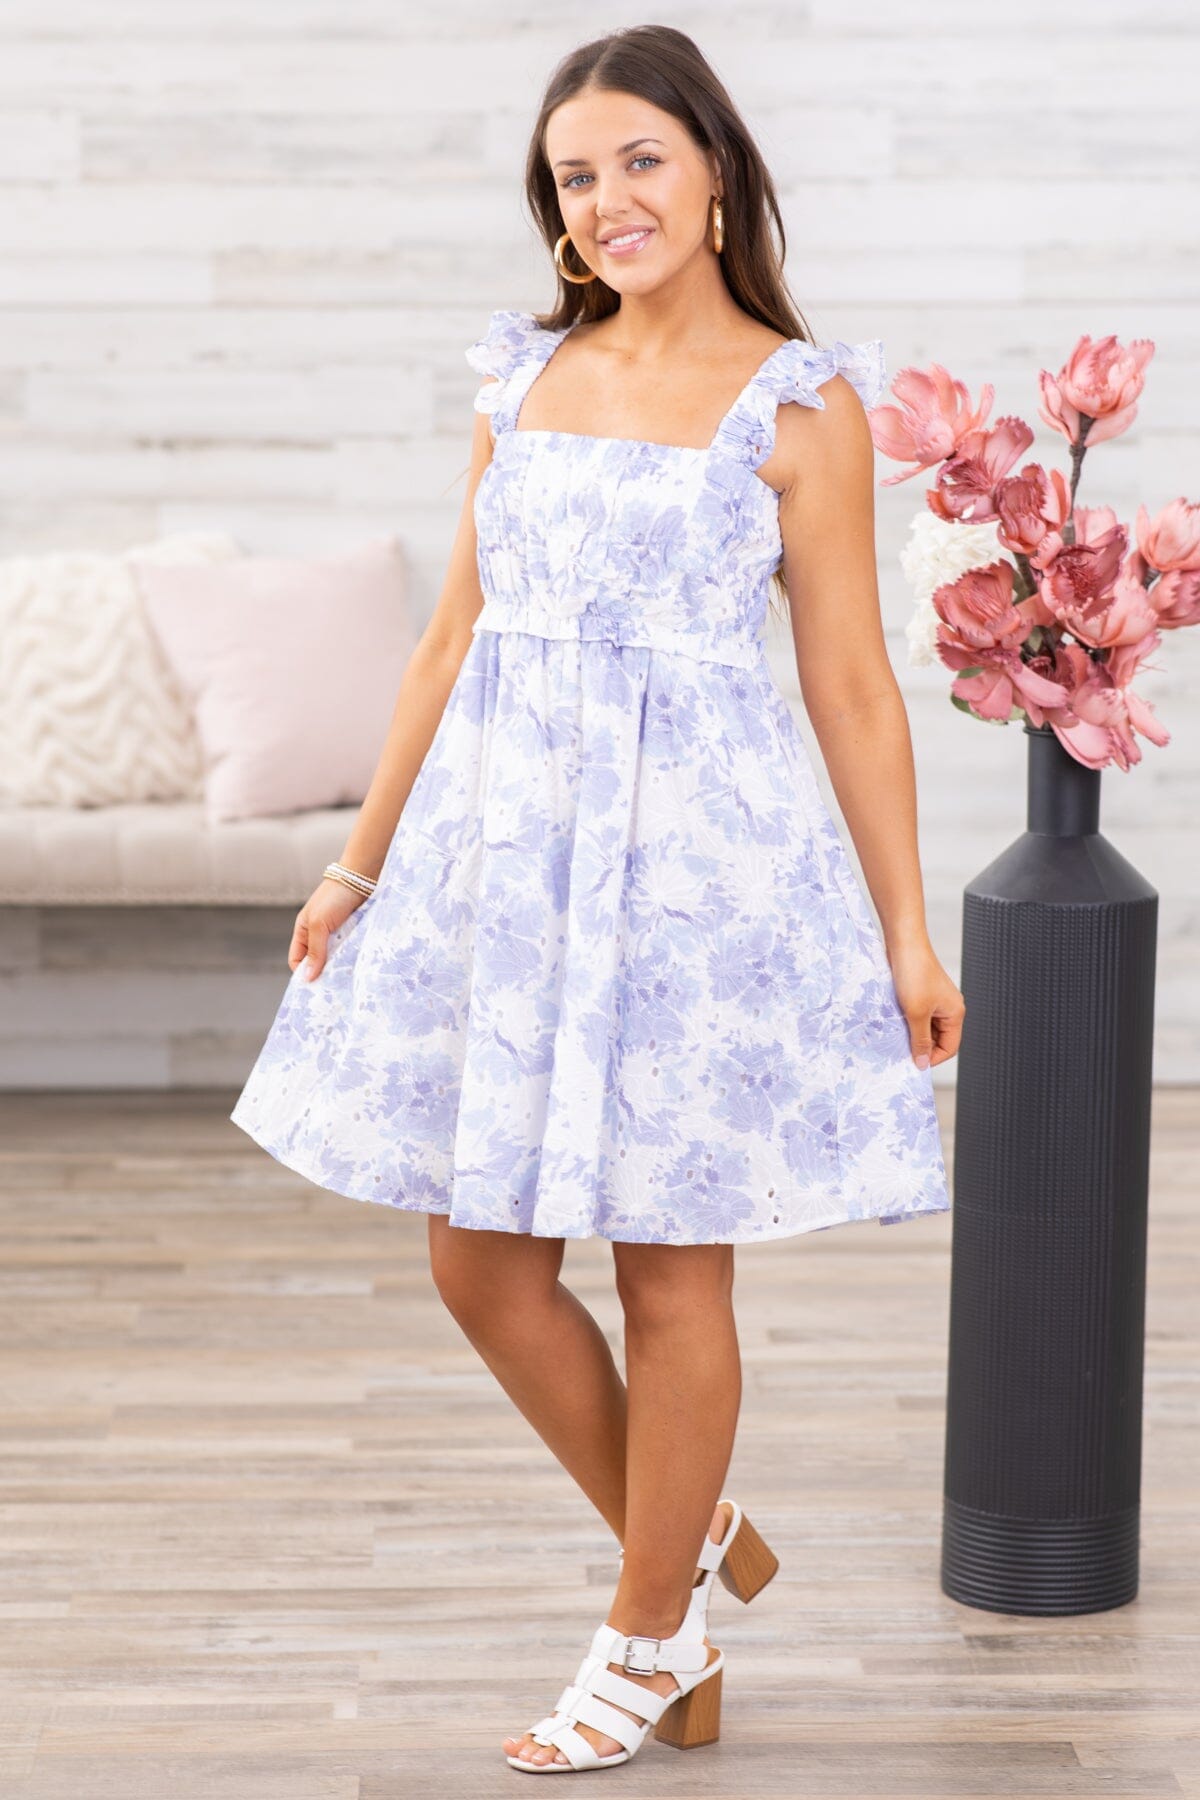 White and Blue Floral Smocked Bodice Dress - Filly Flair